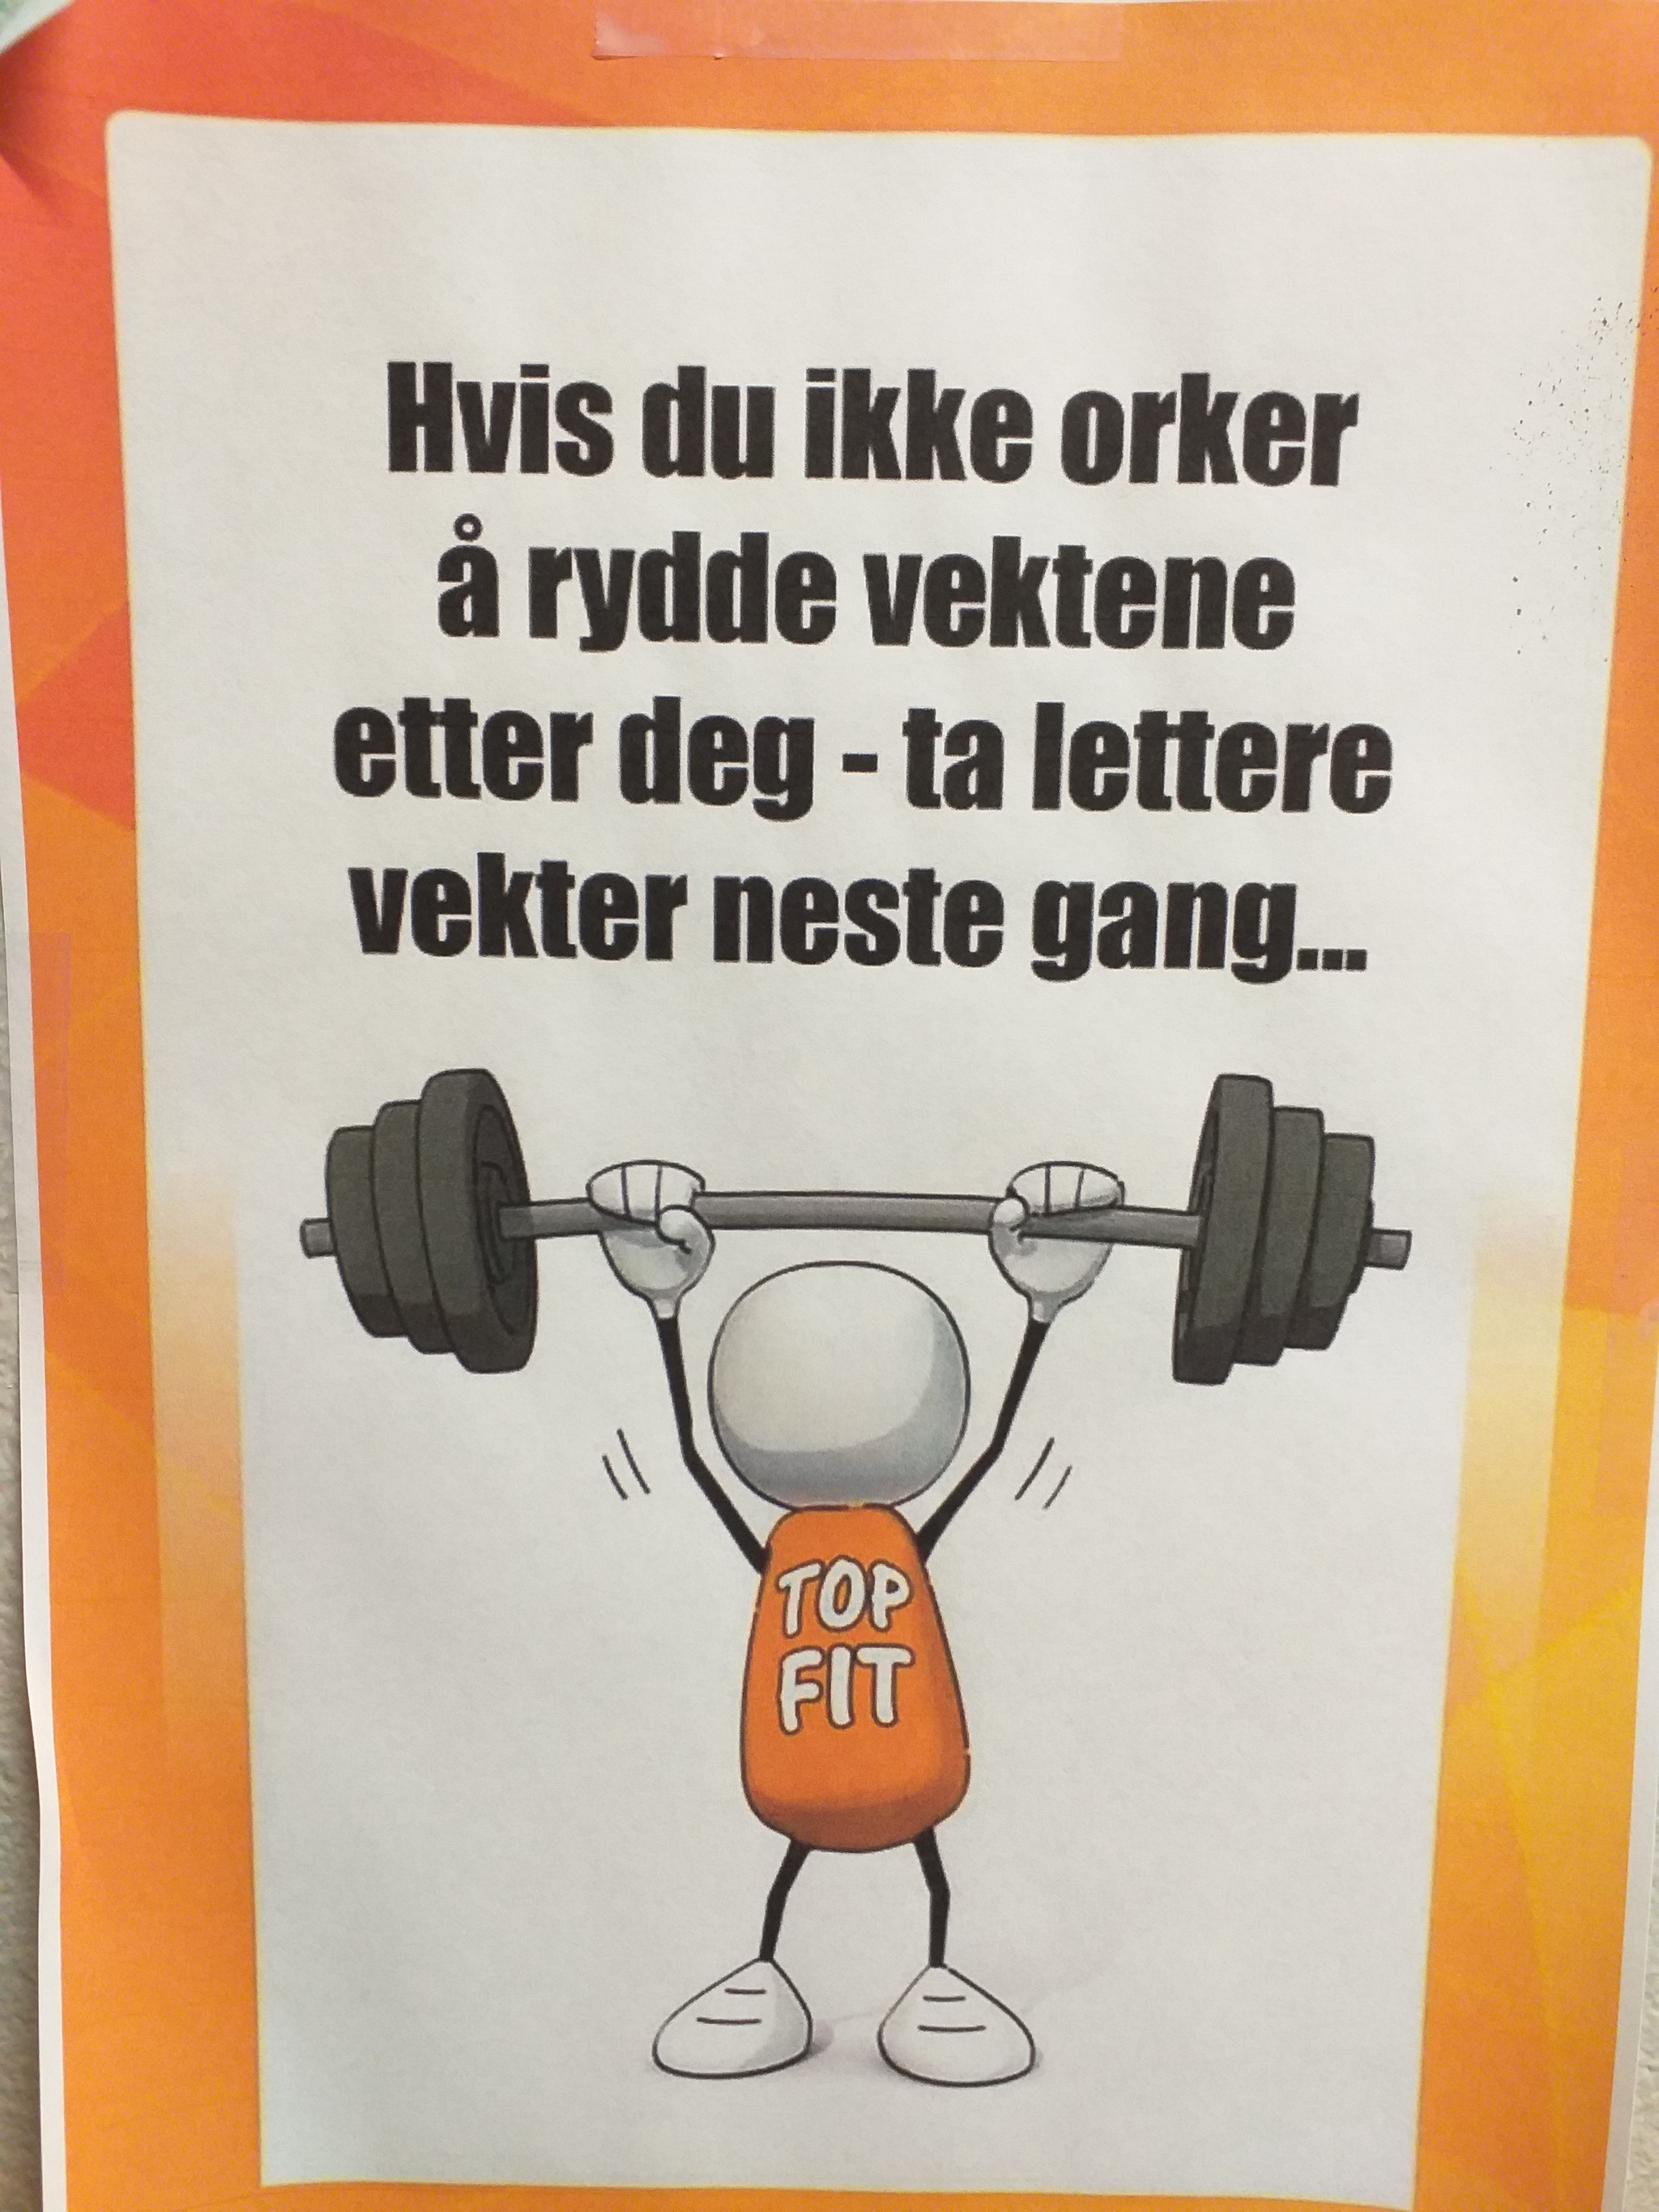 Motivational texts, in the Norwegian gym. They motivate you to put weights in their places. I like. With humor - My, Norway, Sport, Gym, Motivation, Etiquette, Images, Longpost